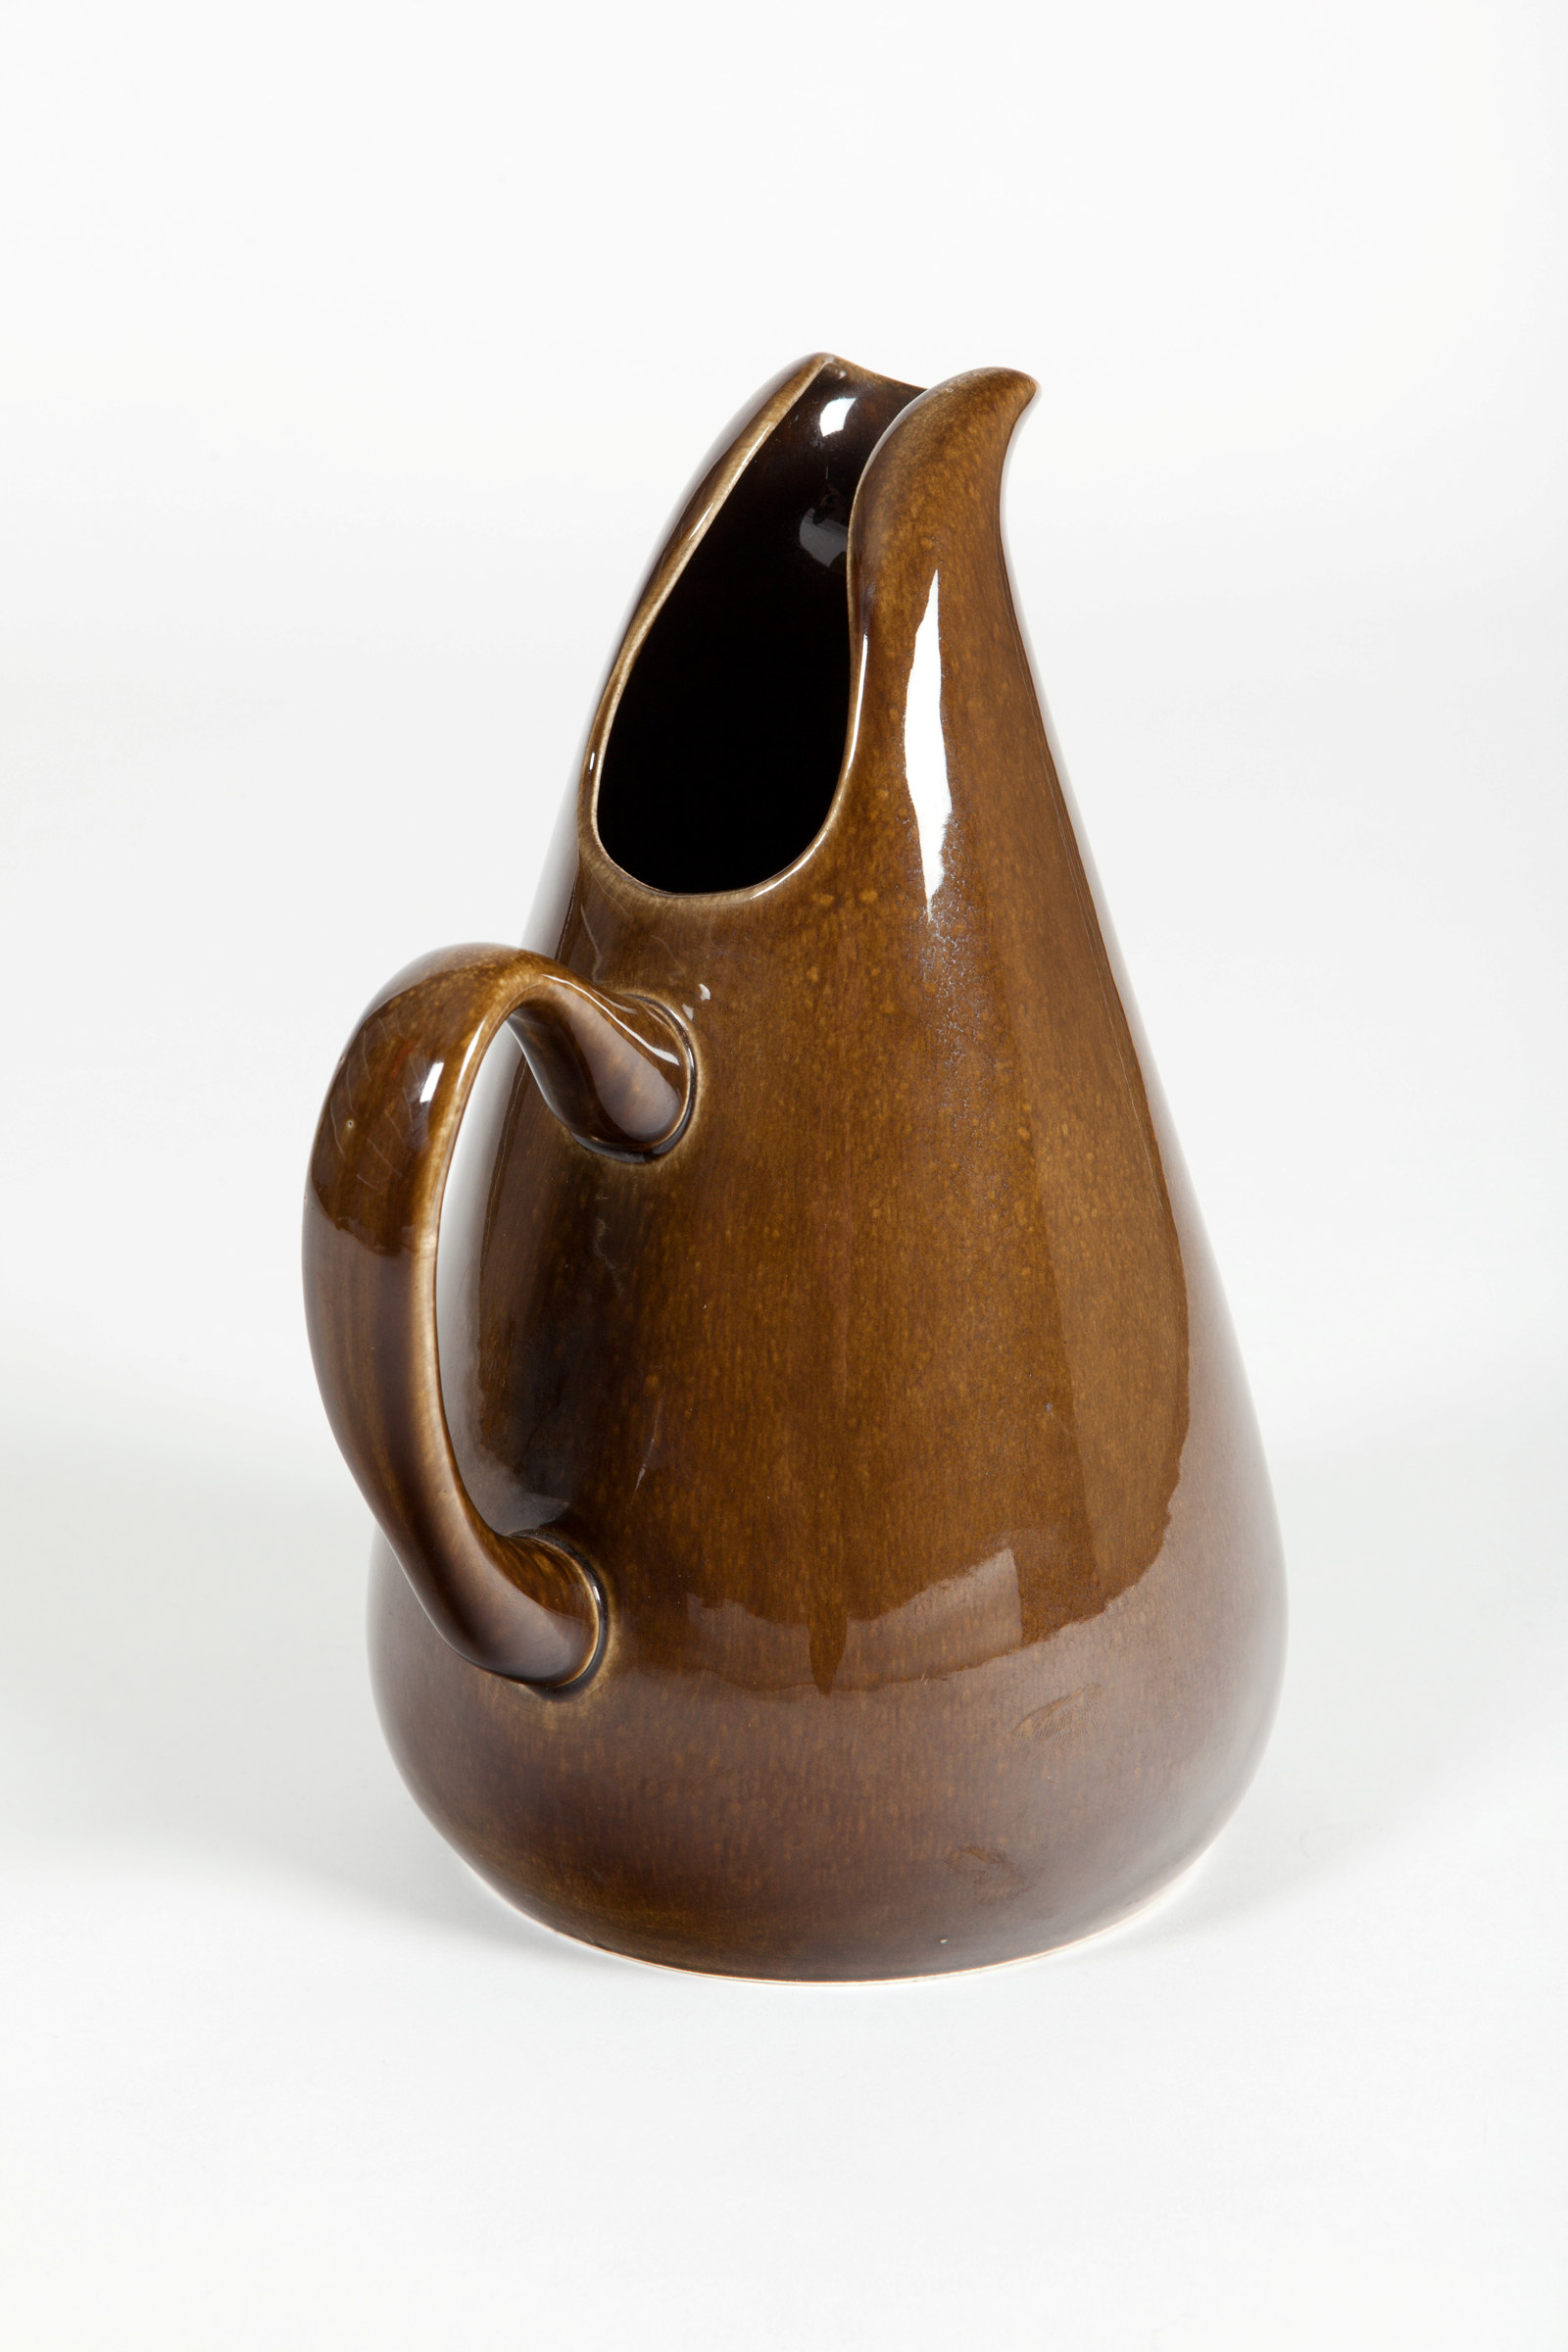 Jug, part of 103 piece dinner service, designed by Russel Wright in 1937, manufactured by Steubenville Pottery Company, United States of America, 1946, glazed ceramic